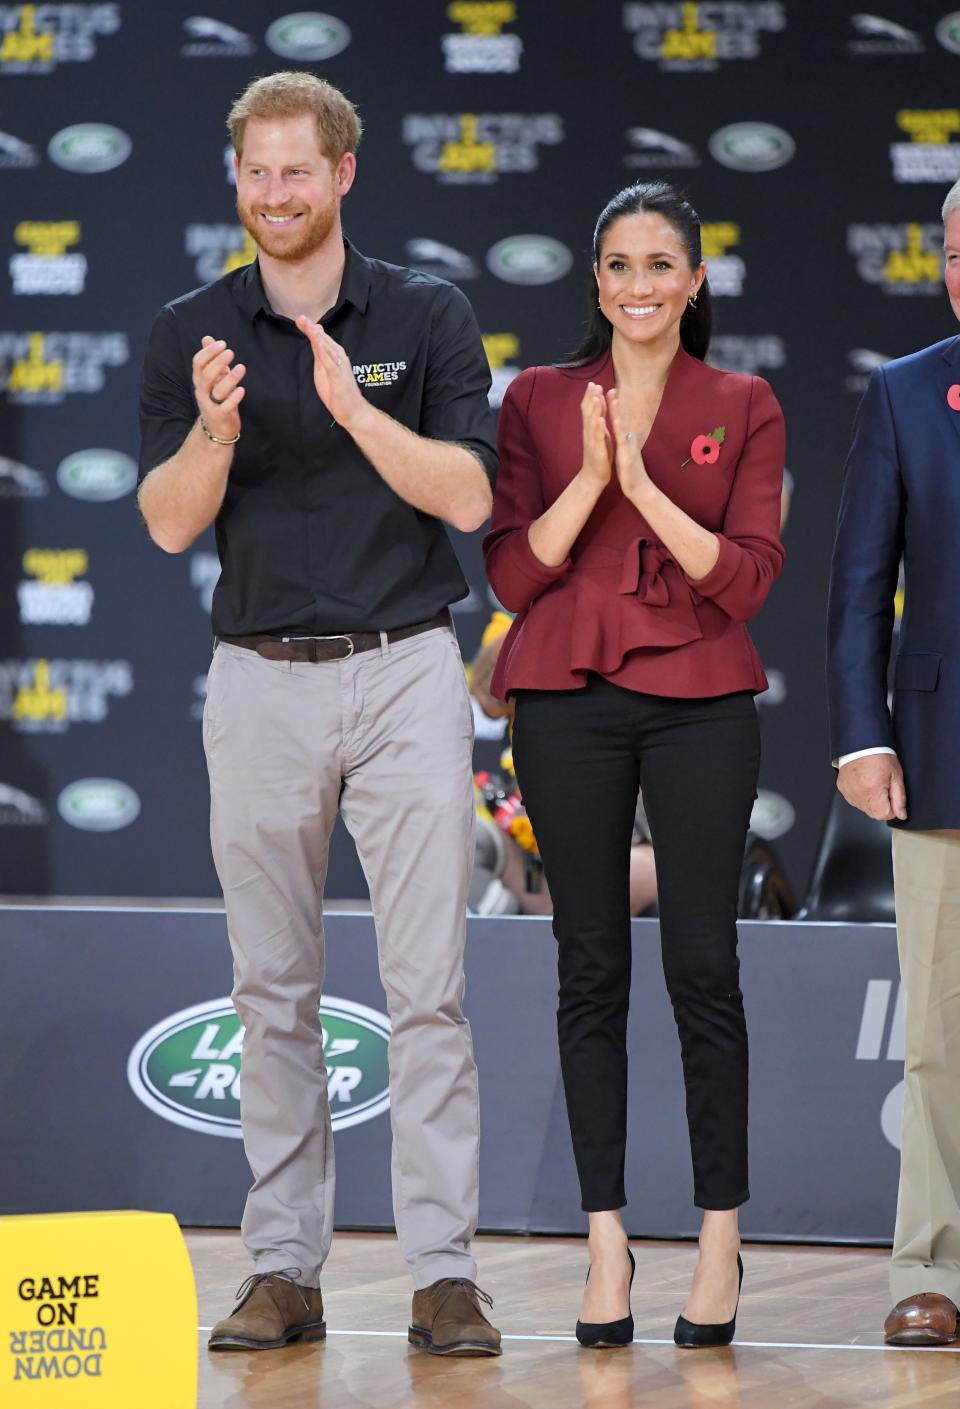 Markle cheered on the finalists of the Invictus Games' basketball tournament in a casual-chic outfit: a Scanlan Theodore wrap jacket, black Outland jeans, and Sarah Flint heels.